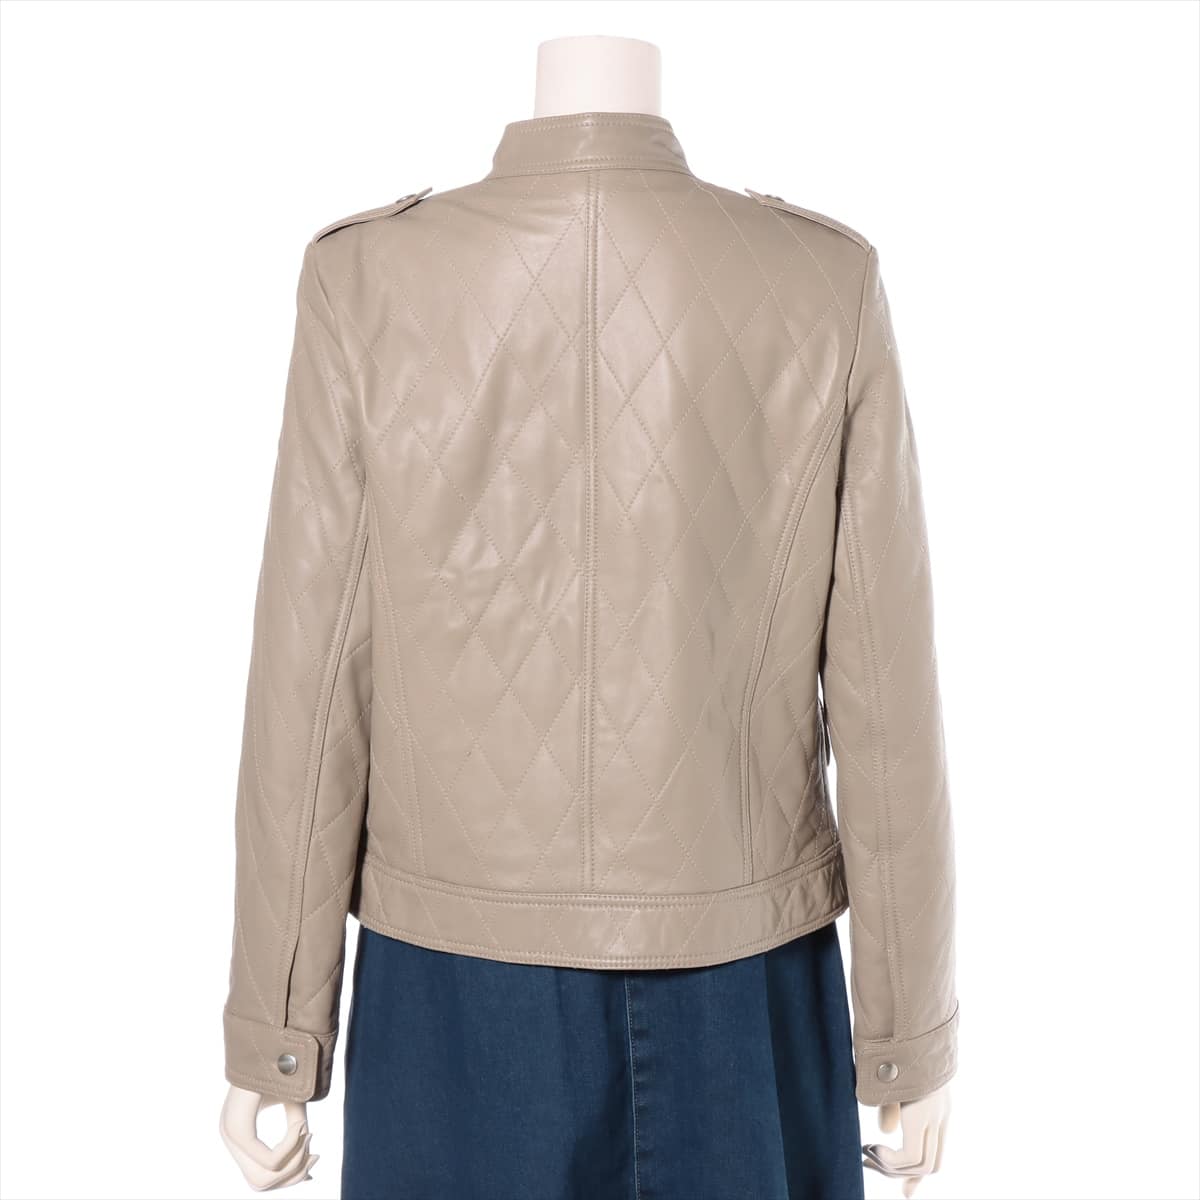 Balmain Leather Leather jacket Unknown size Ladies' Beige  Missing size tag